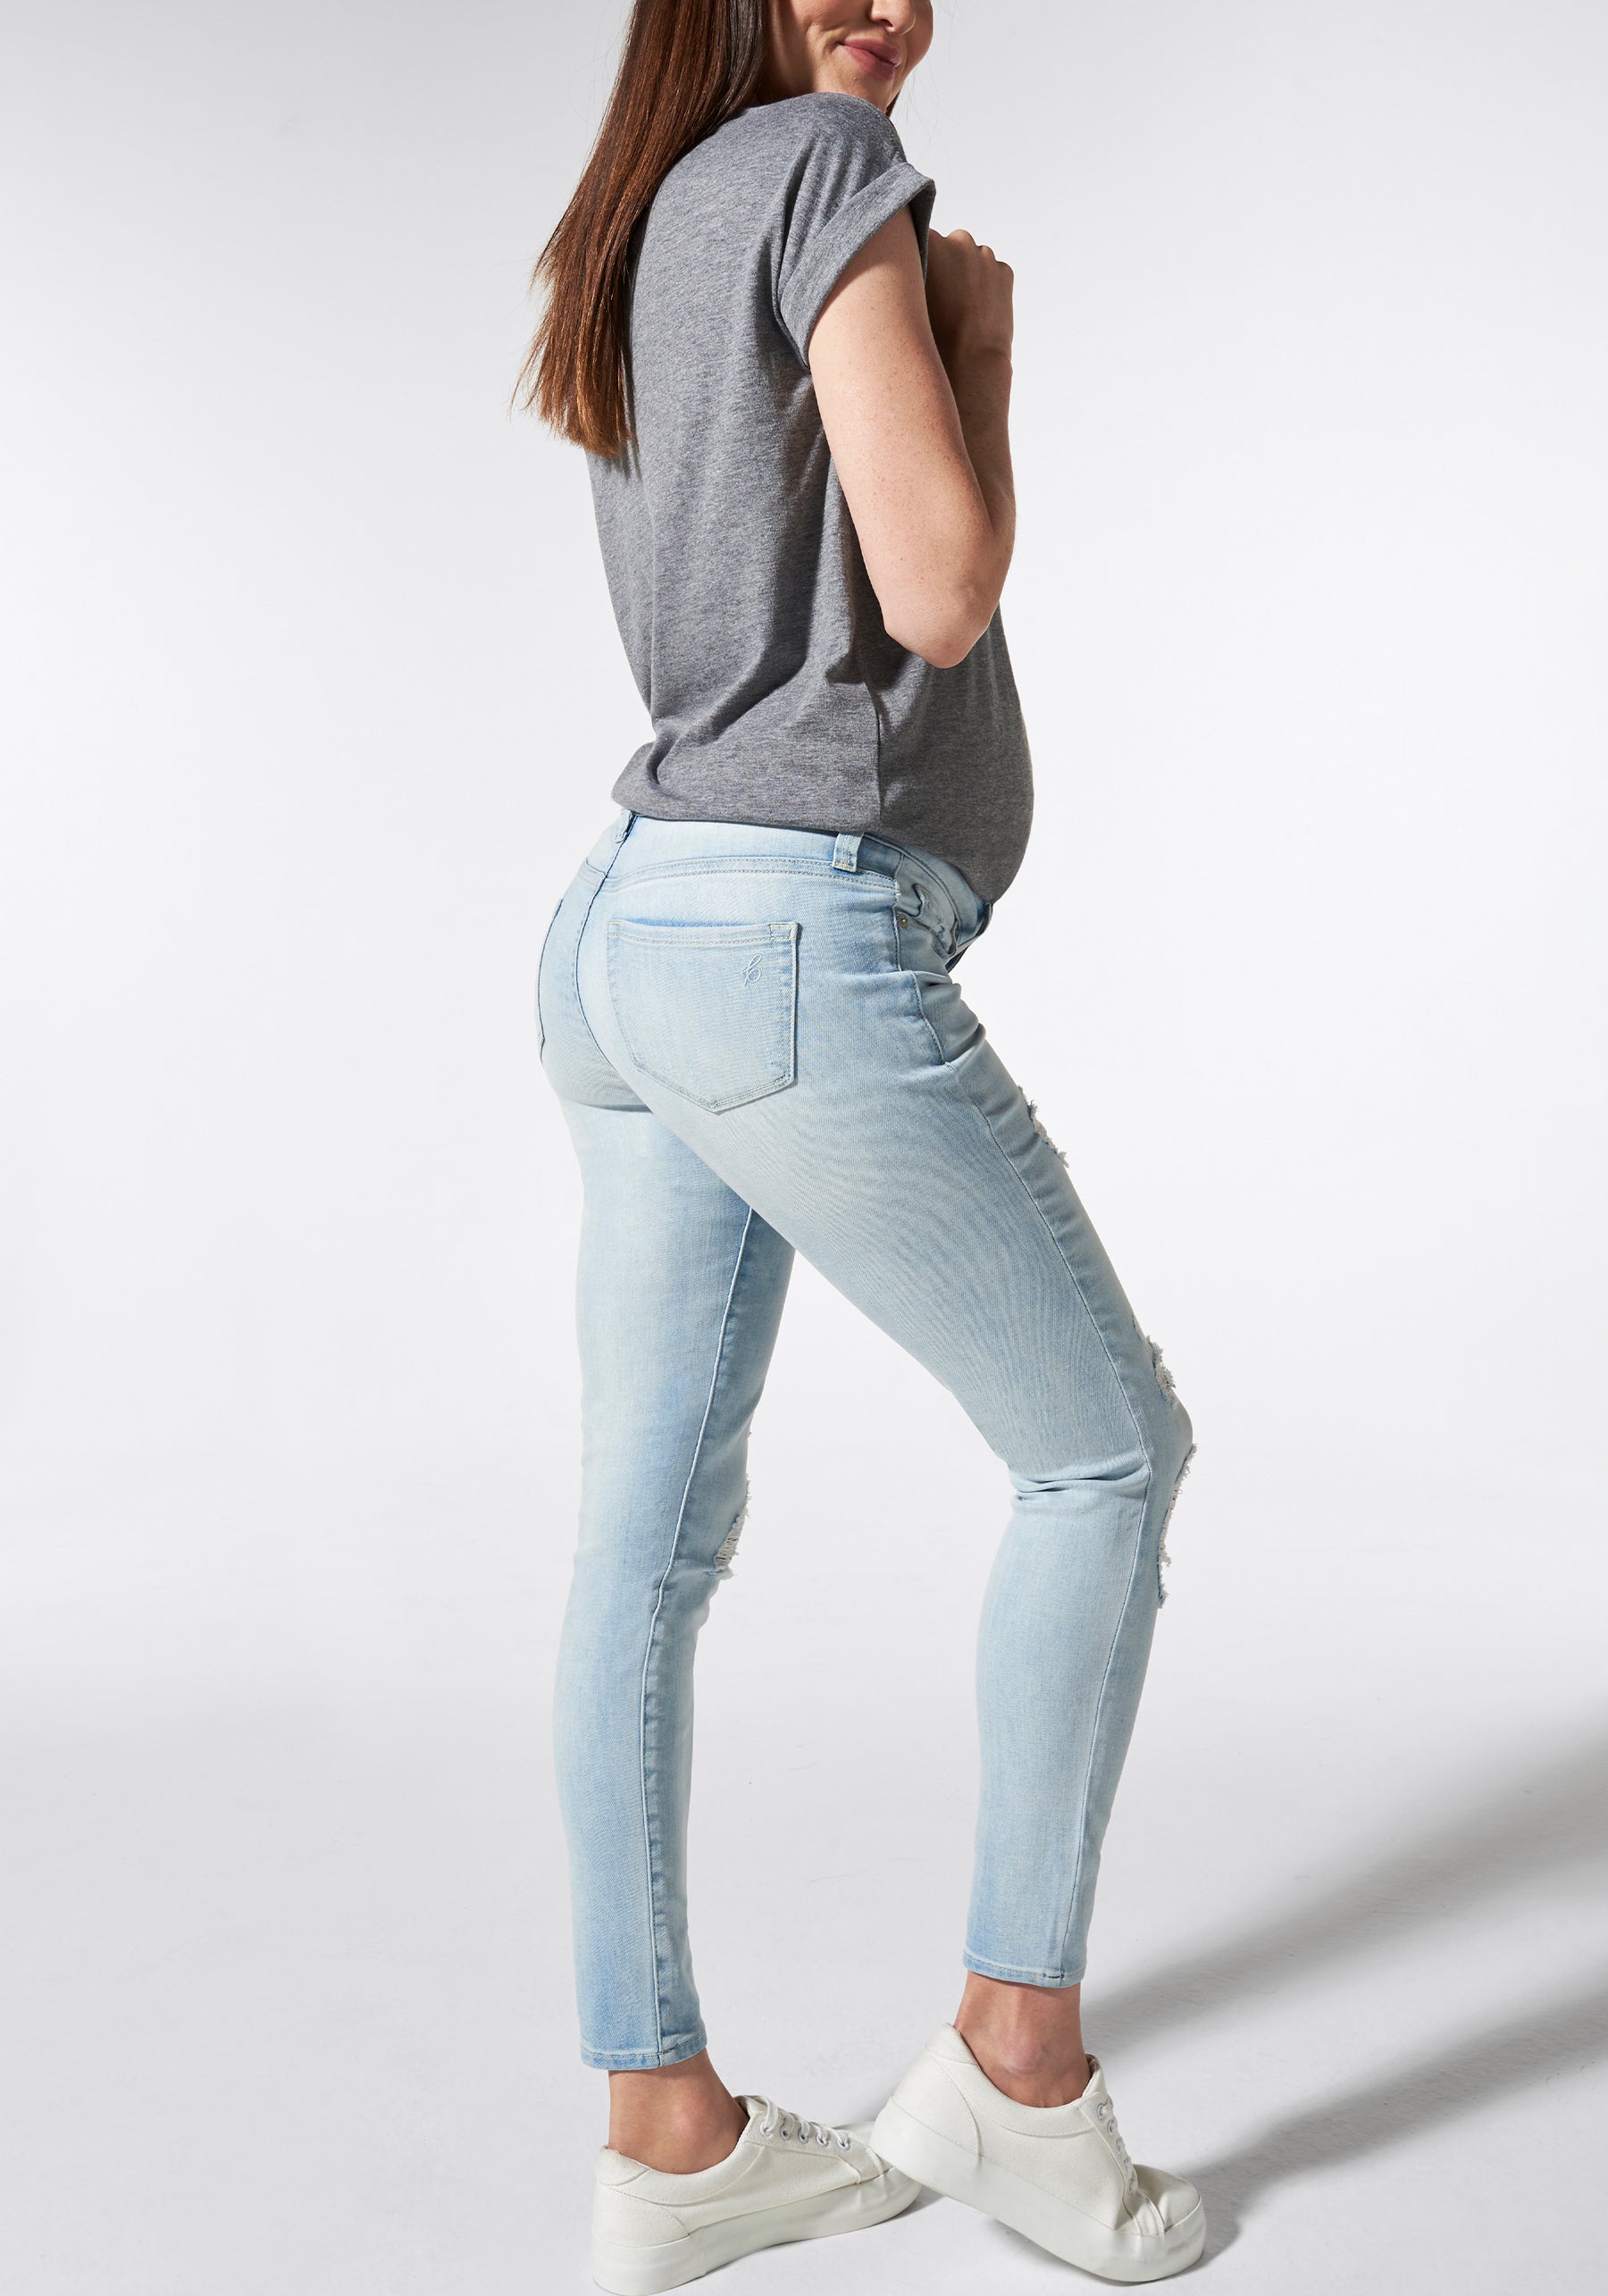 Mums & Bumps Blanqi Postpartum Support Skinny Jeans Smoke Wash Online in  Oman, Buy at Best Price from  - 706ddaedb7af9